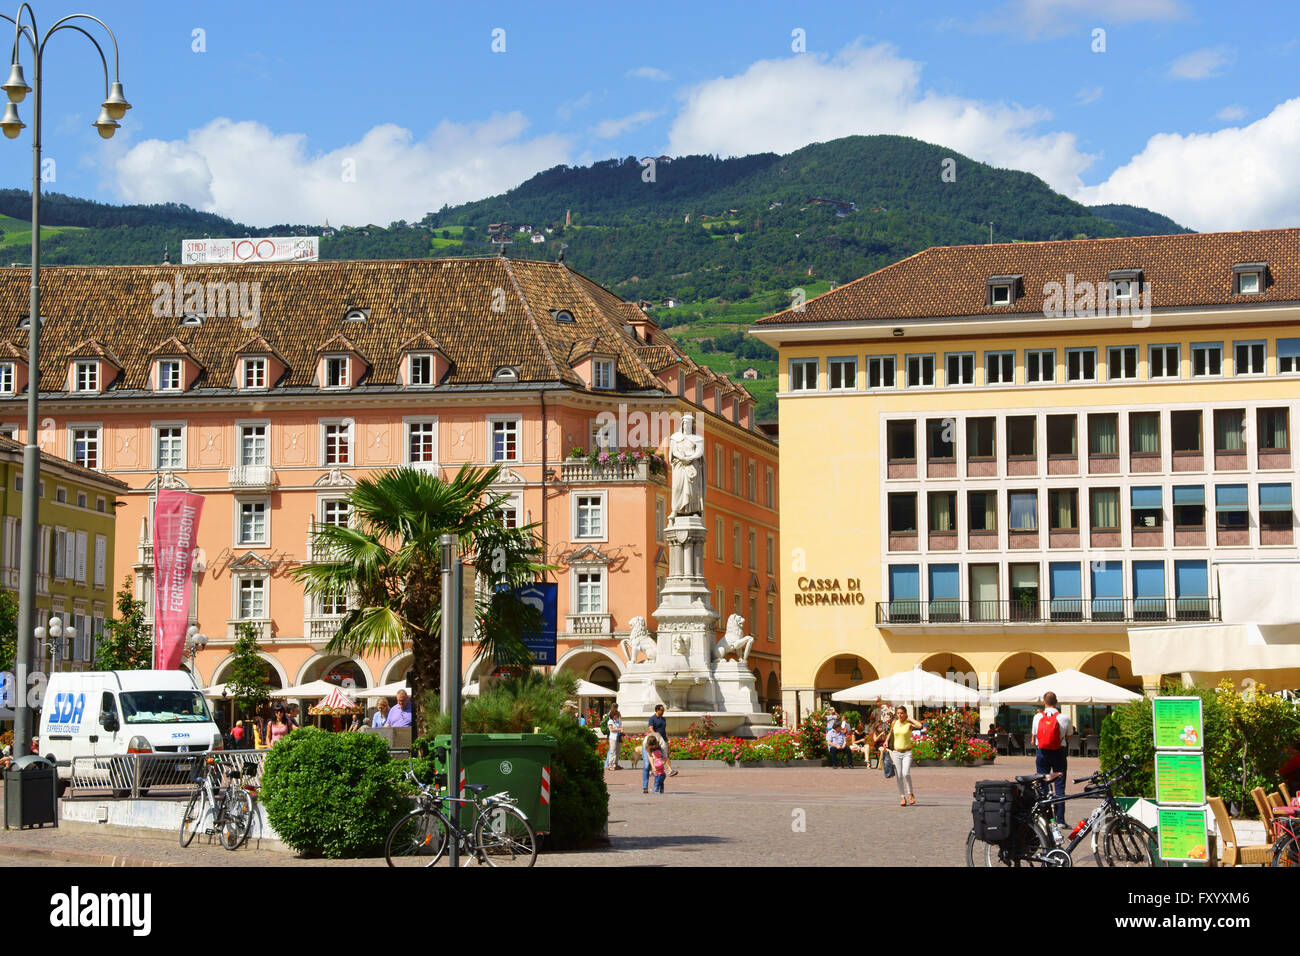 Bolzano, Italy - August 21, 2014: Walther Square (Piazza Walther) built in 1808 by order of King Maximilian of Bavaria Stock Photo